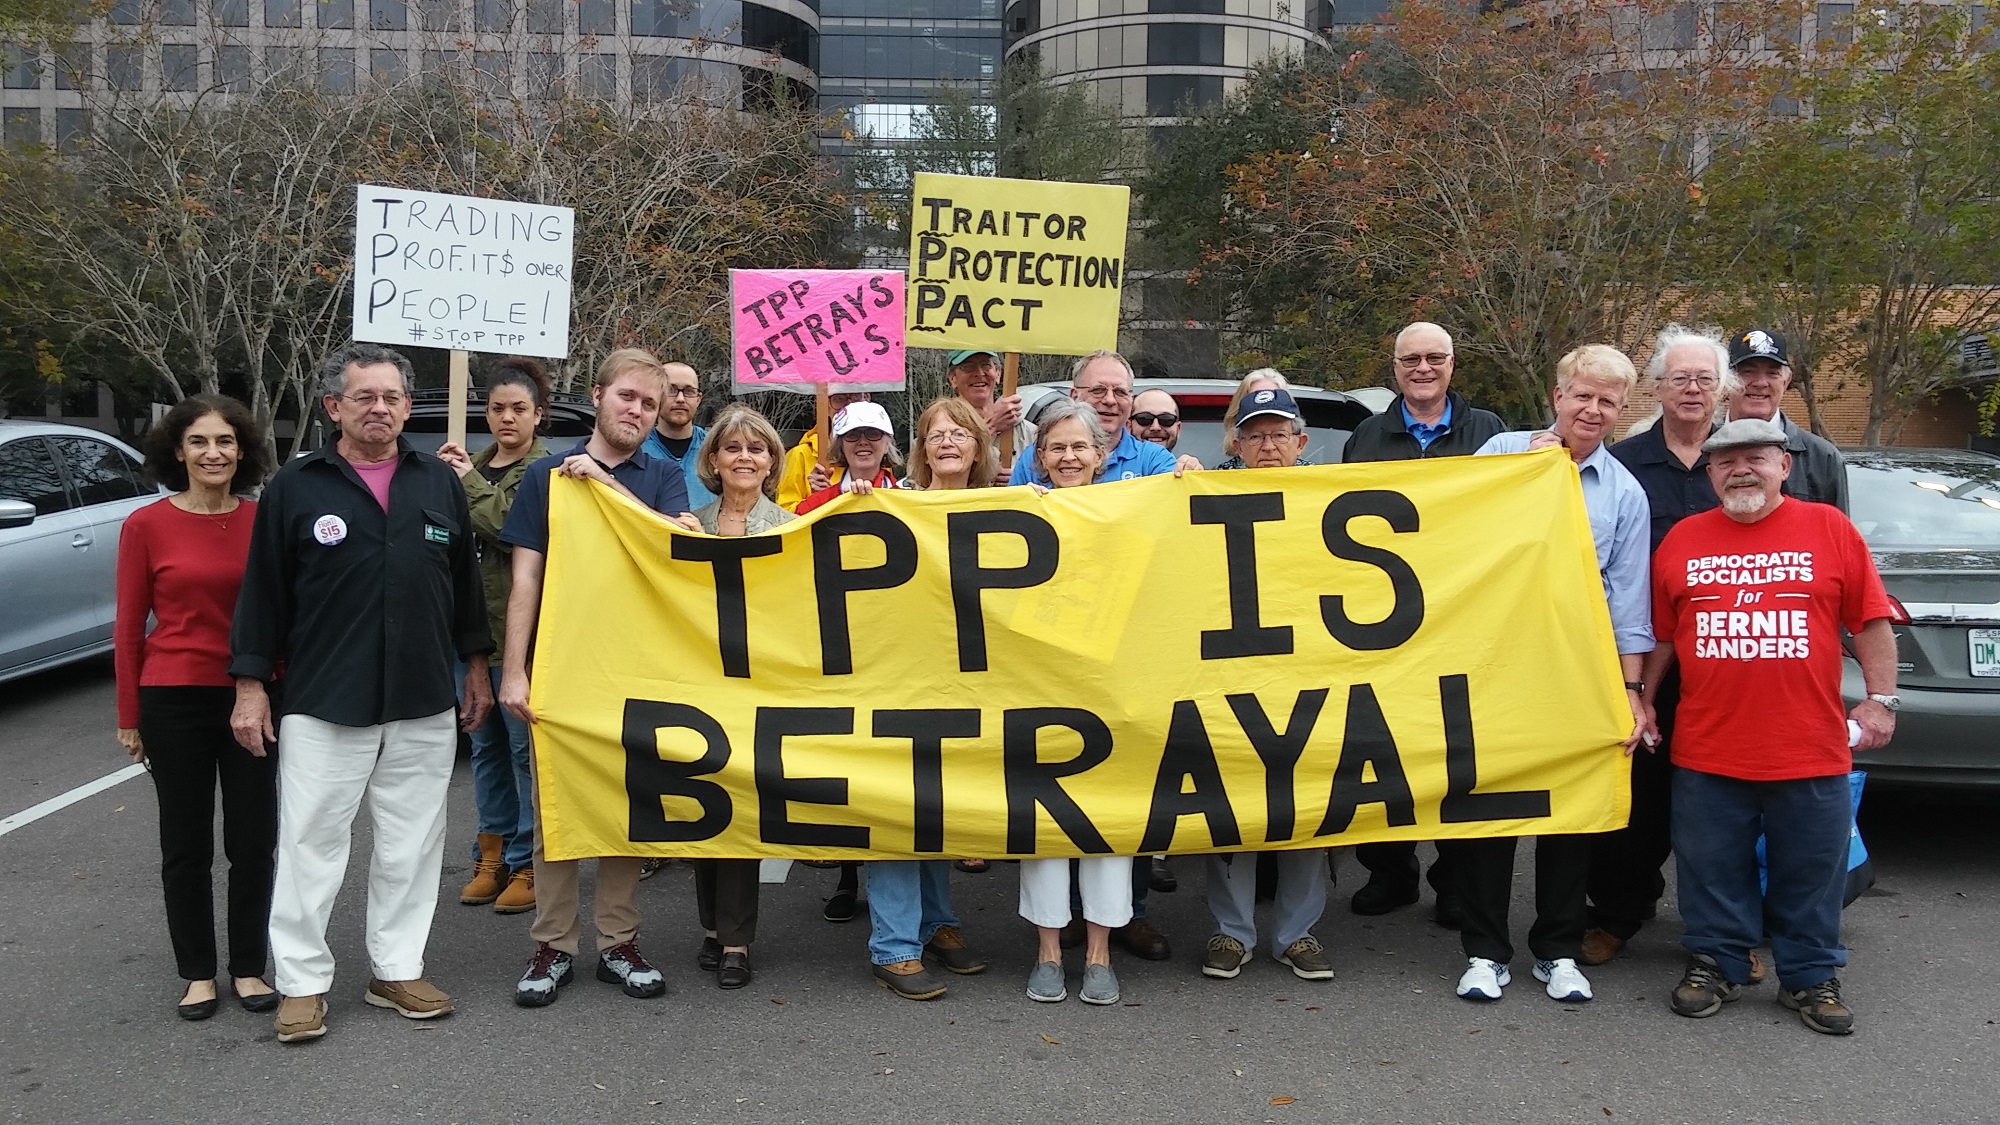 Friends of the Earth members and allies protest TPP signing in Tampa